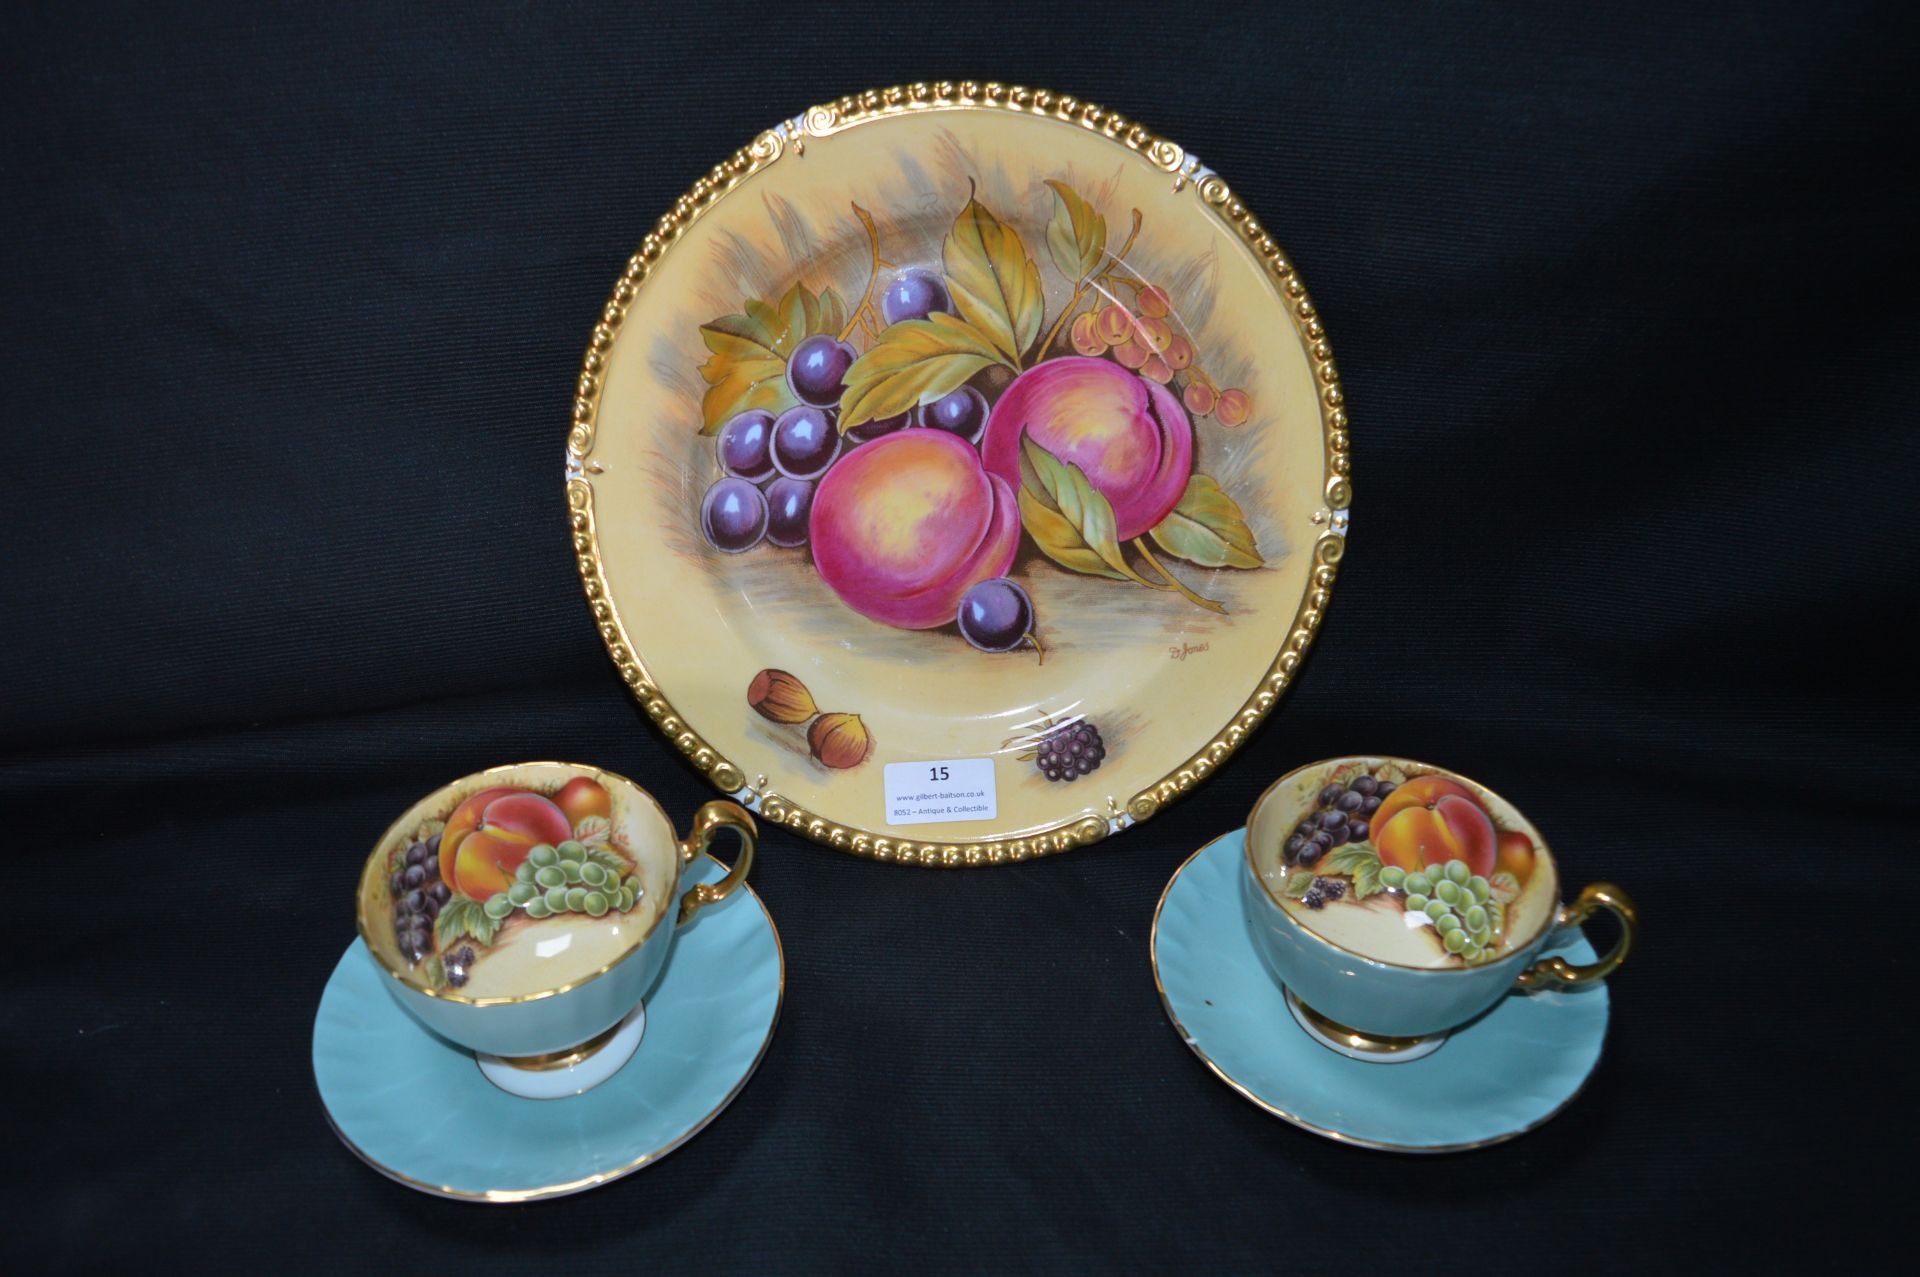 Aynsley Fruit Patterned Plated and Two Cups & Sauc